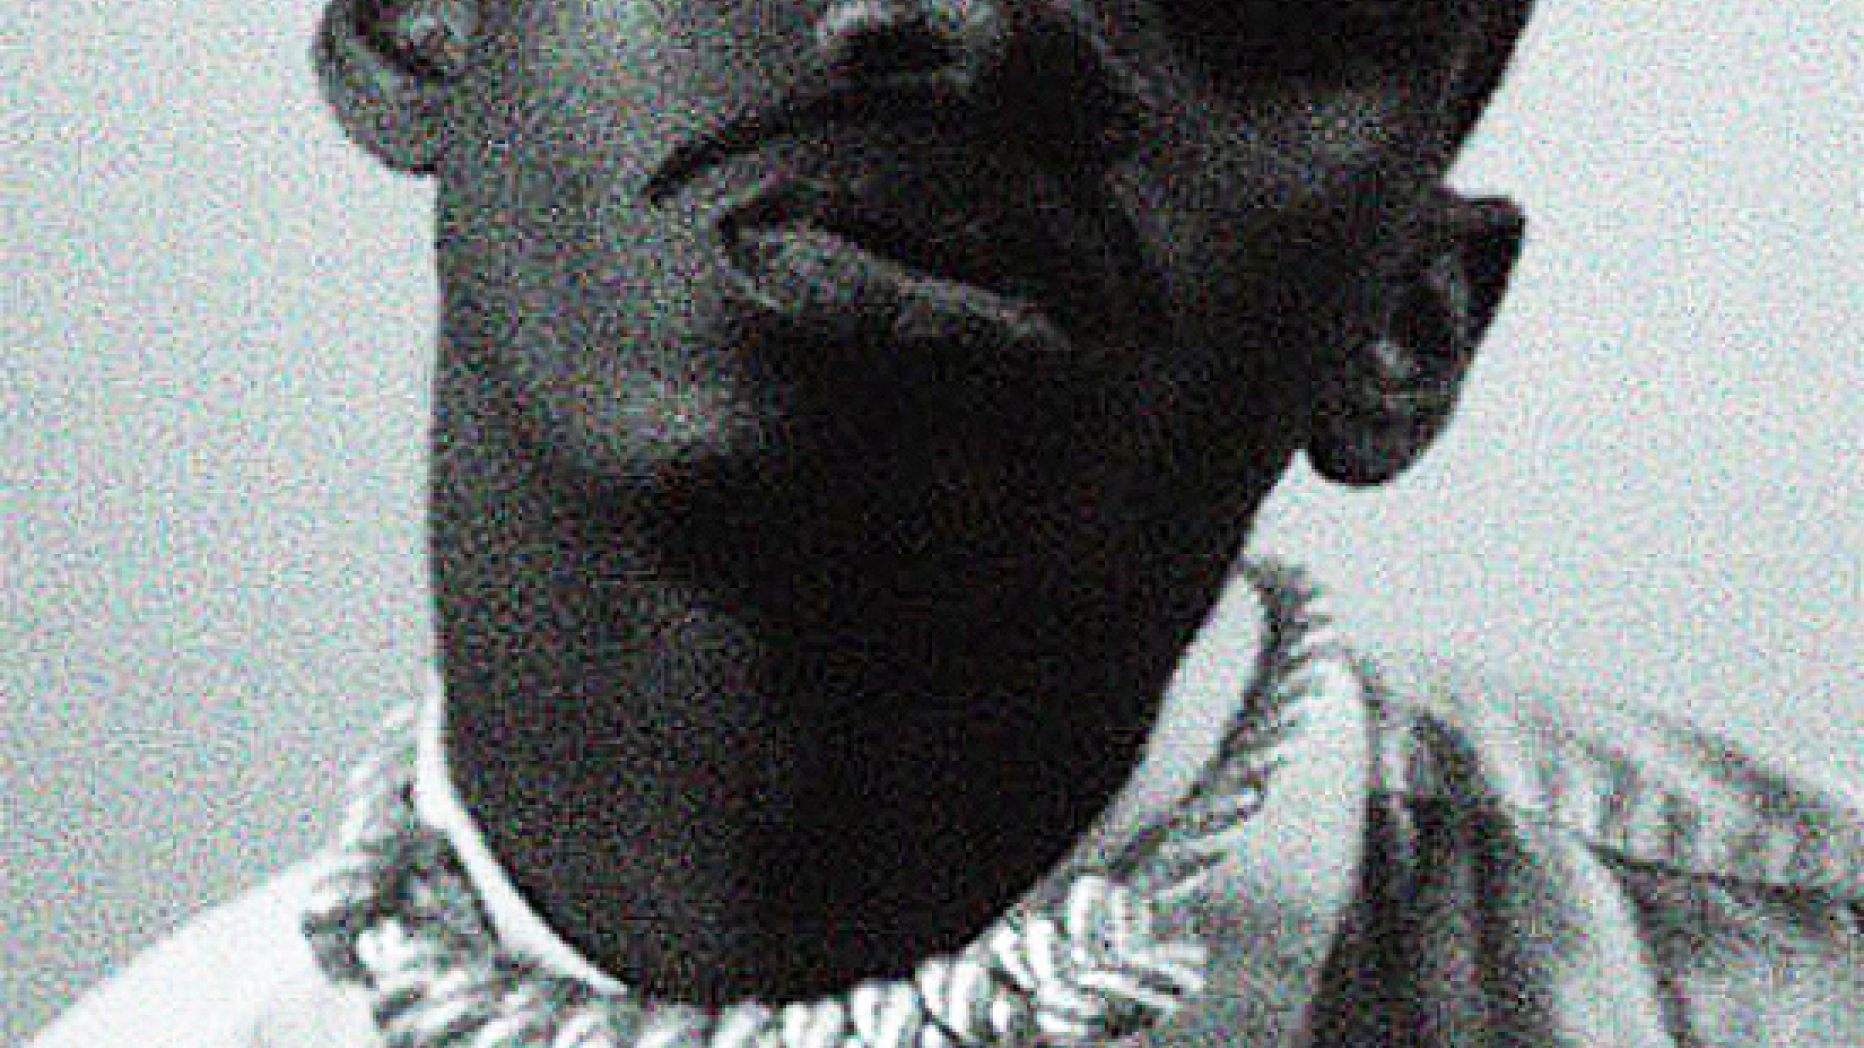 Photograph of a young black man wearing a necklace that stylistically resemble a noose.